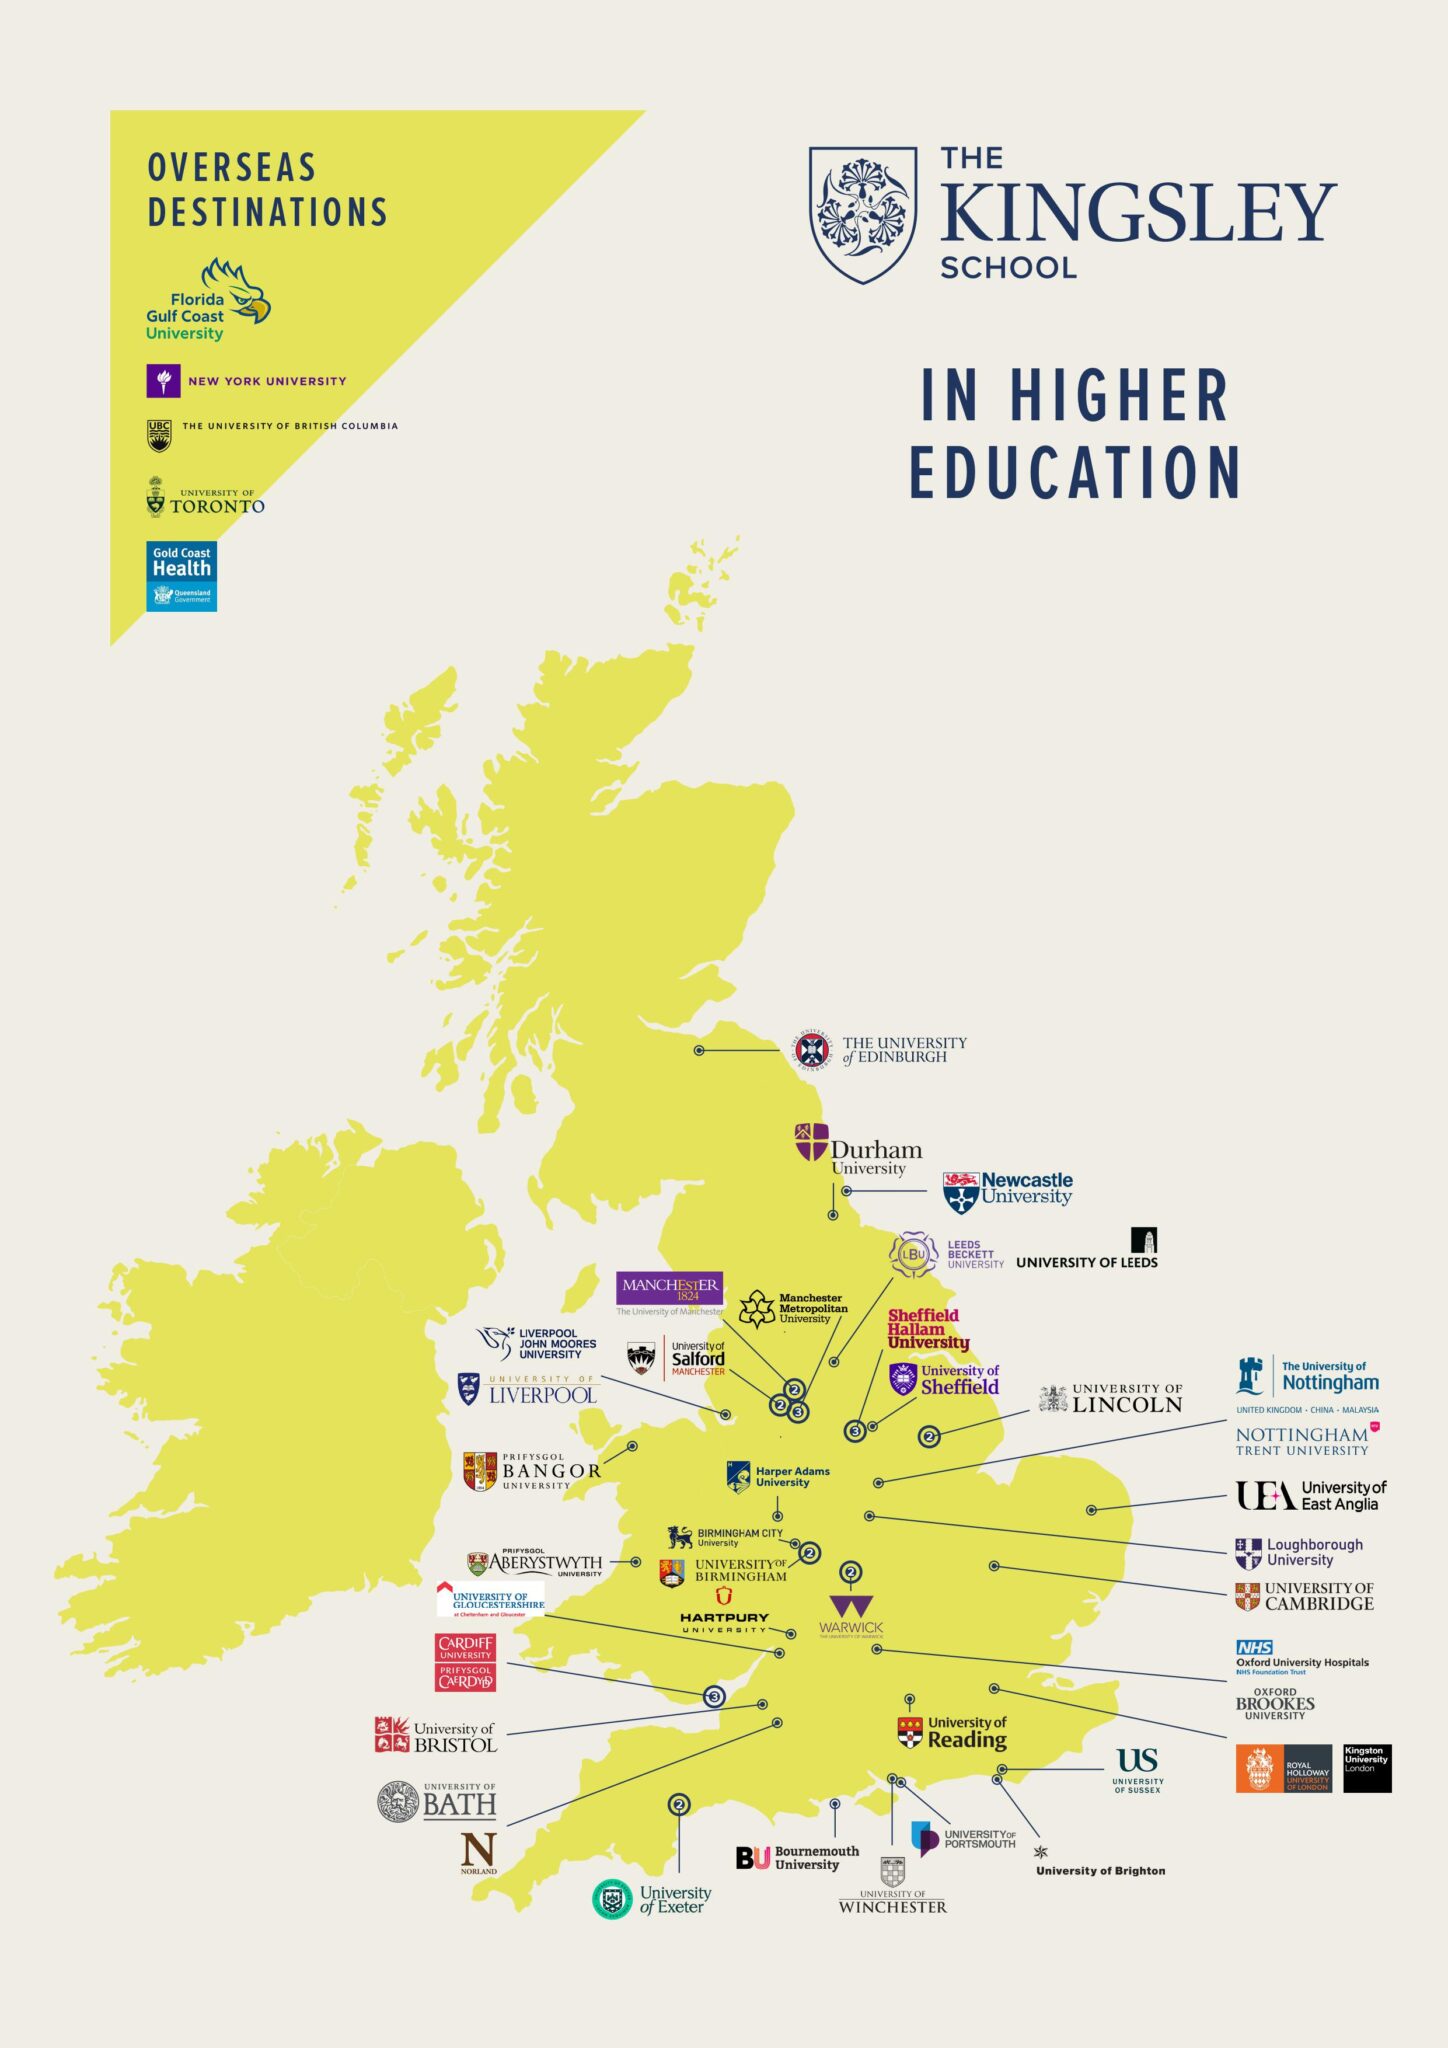 A map that shows recent university destinations both in the United Kingdom and overseas